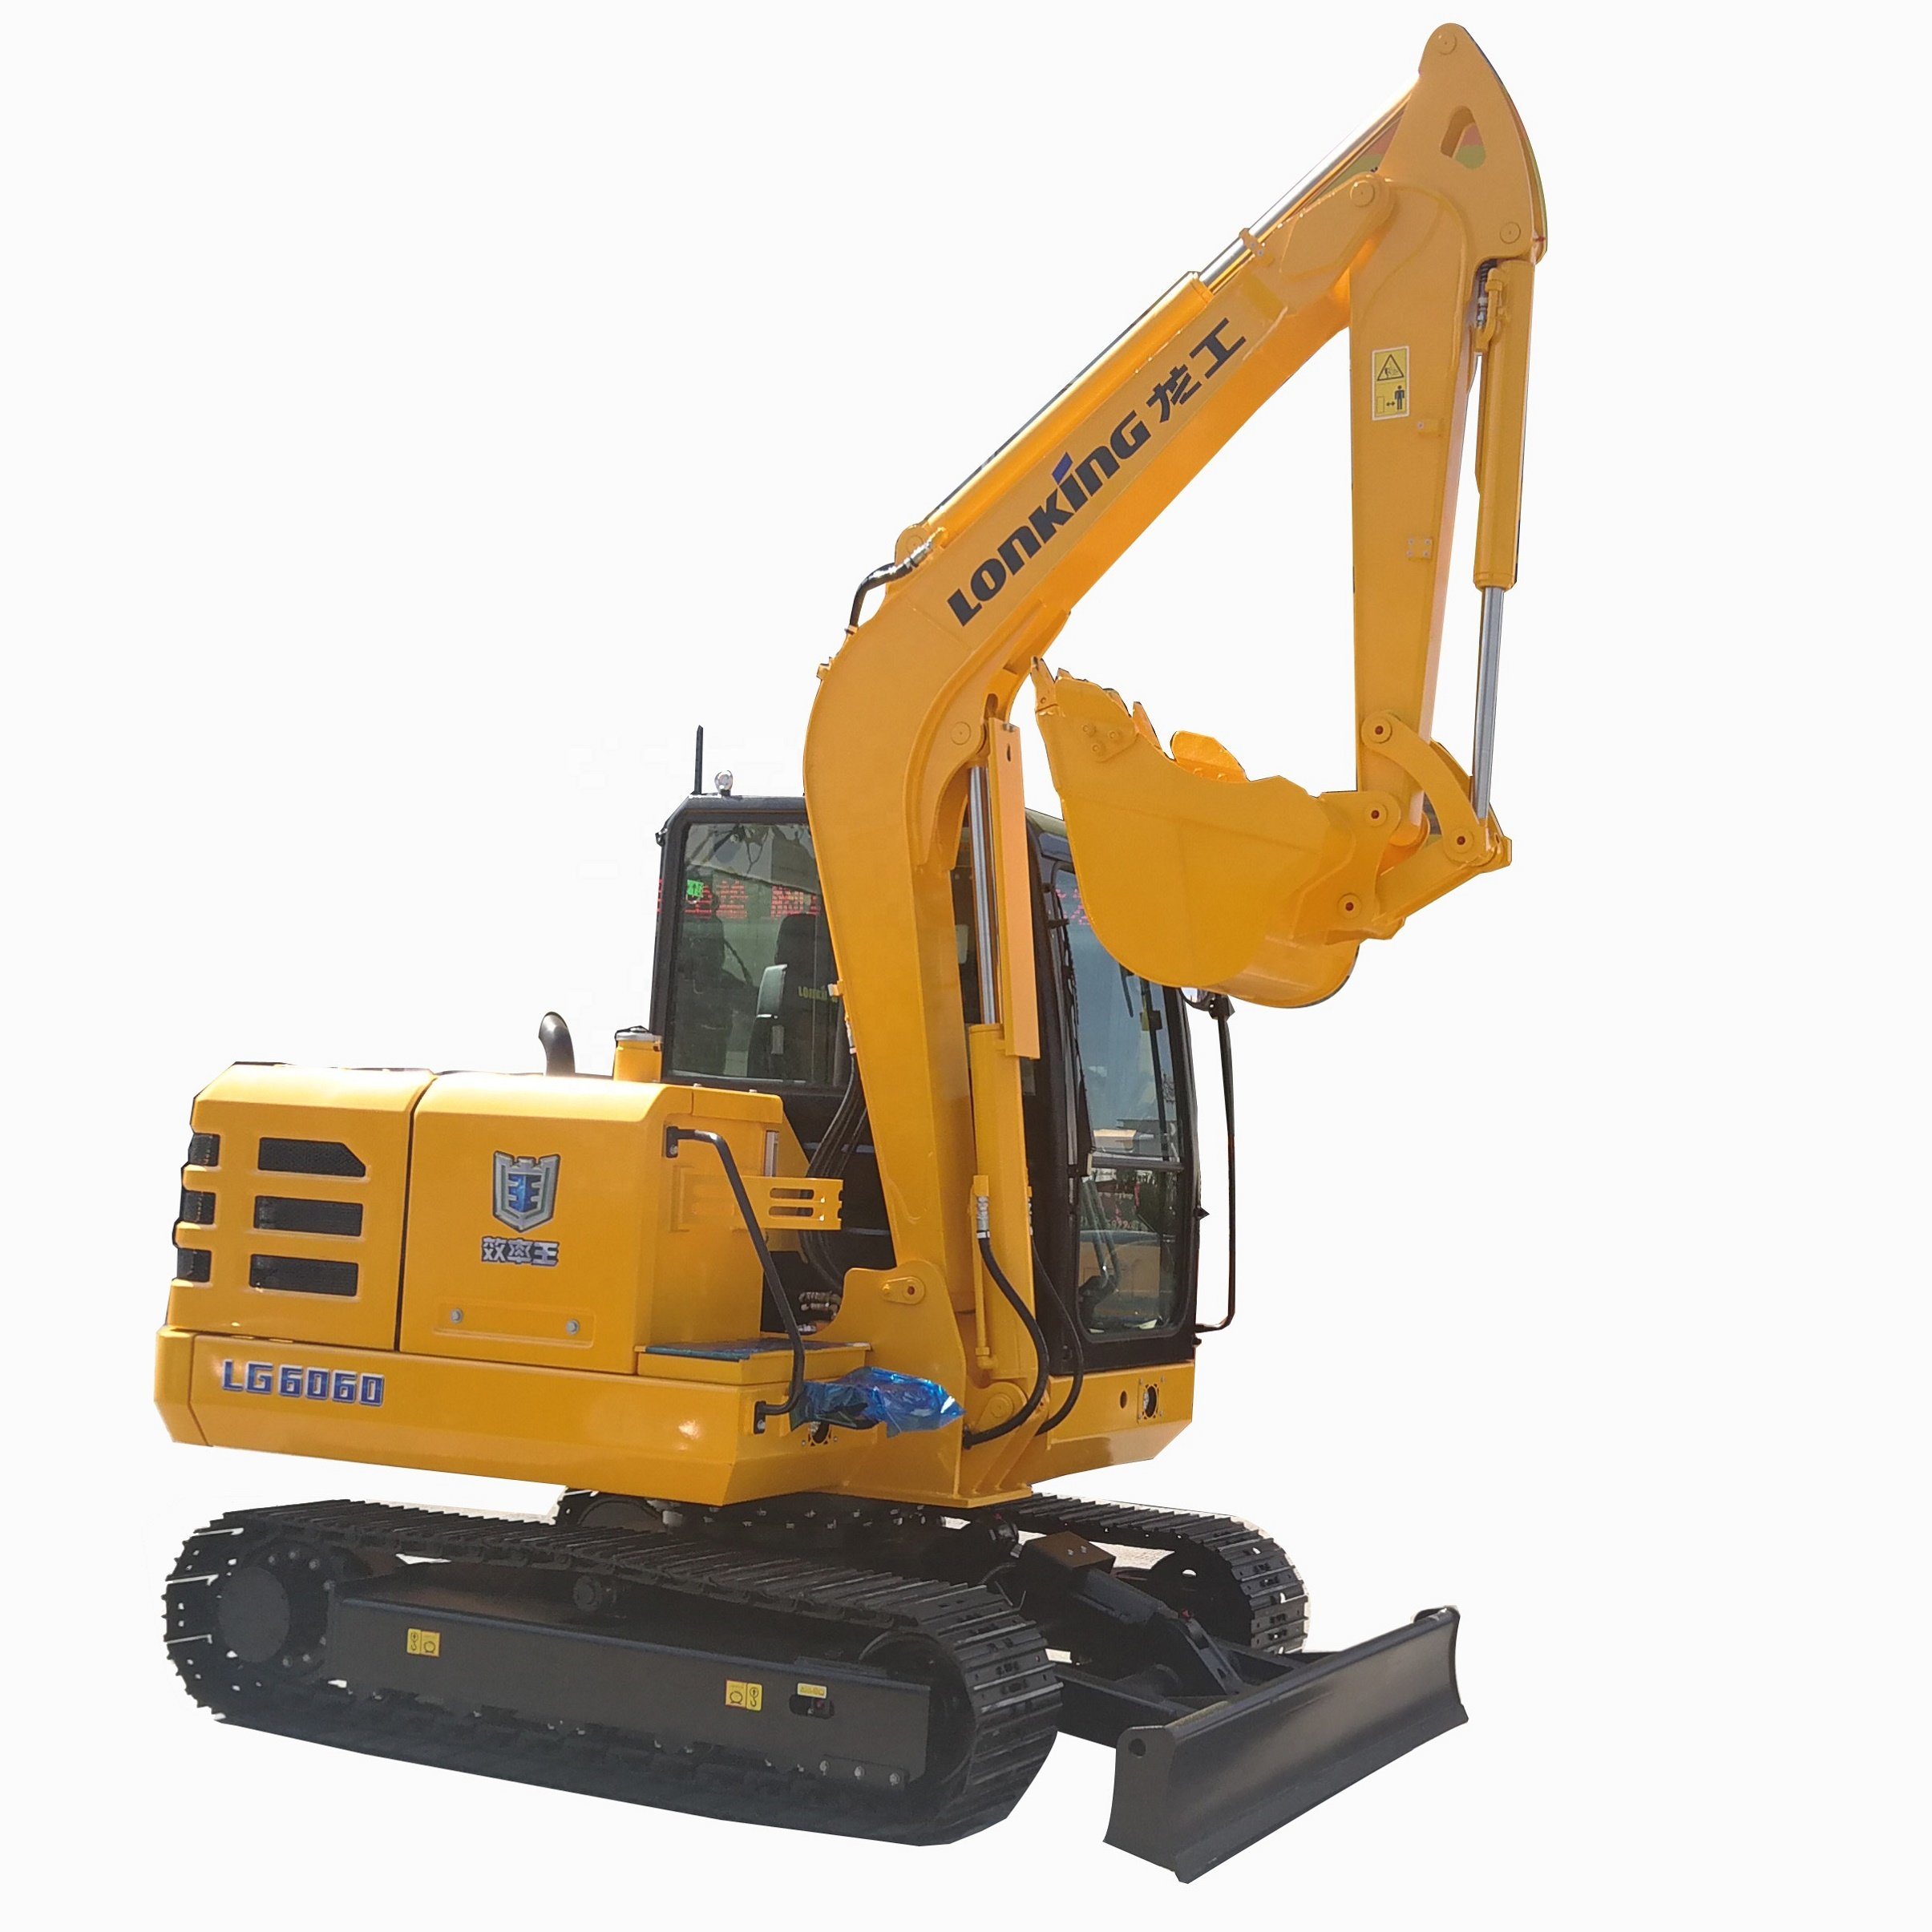 China Lonking Brand New Cdm6060 Excavator with CE Certification